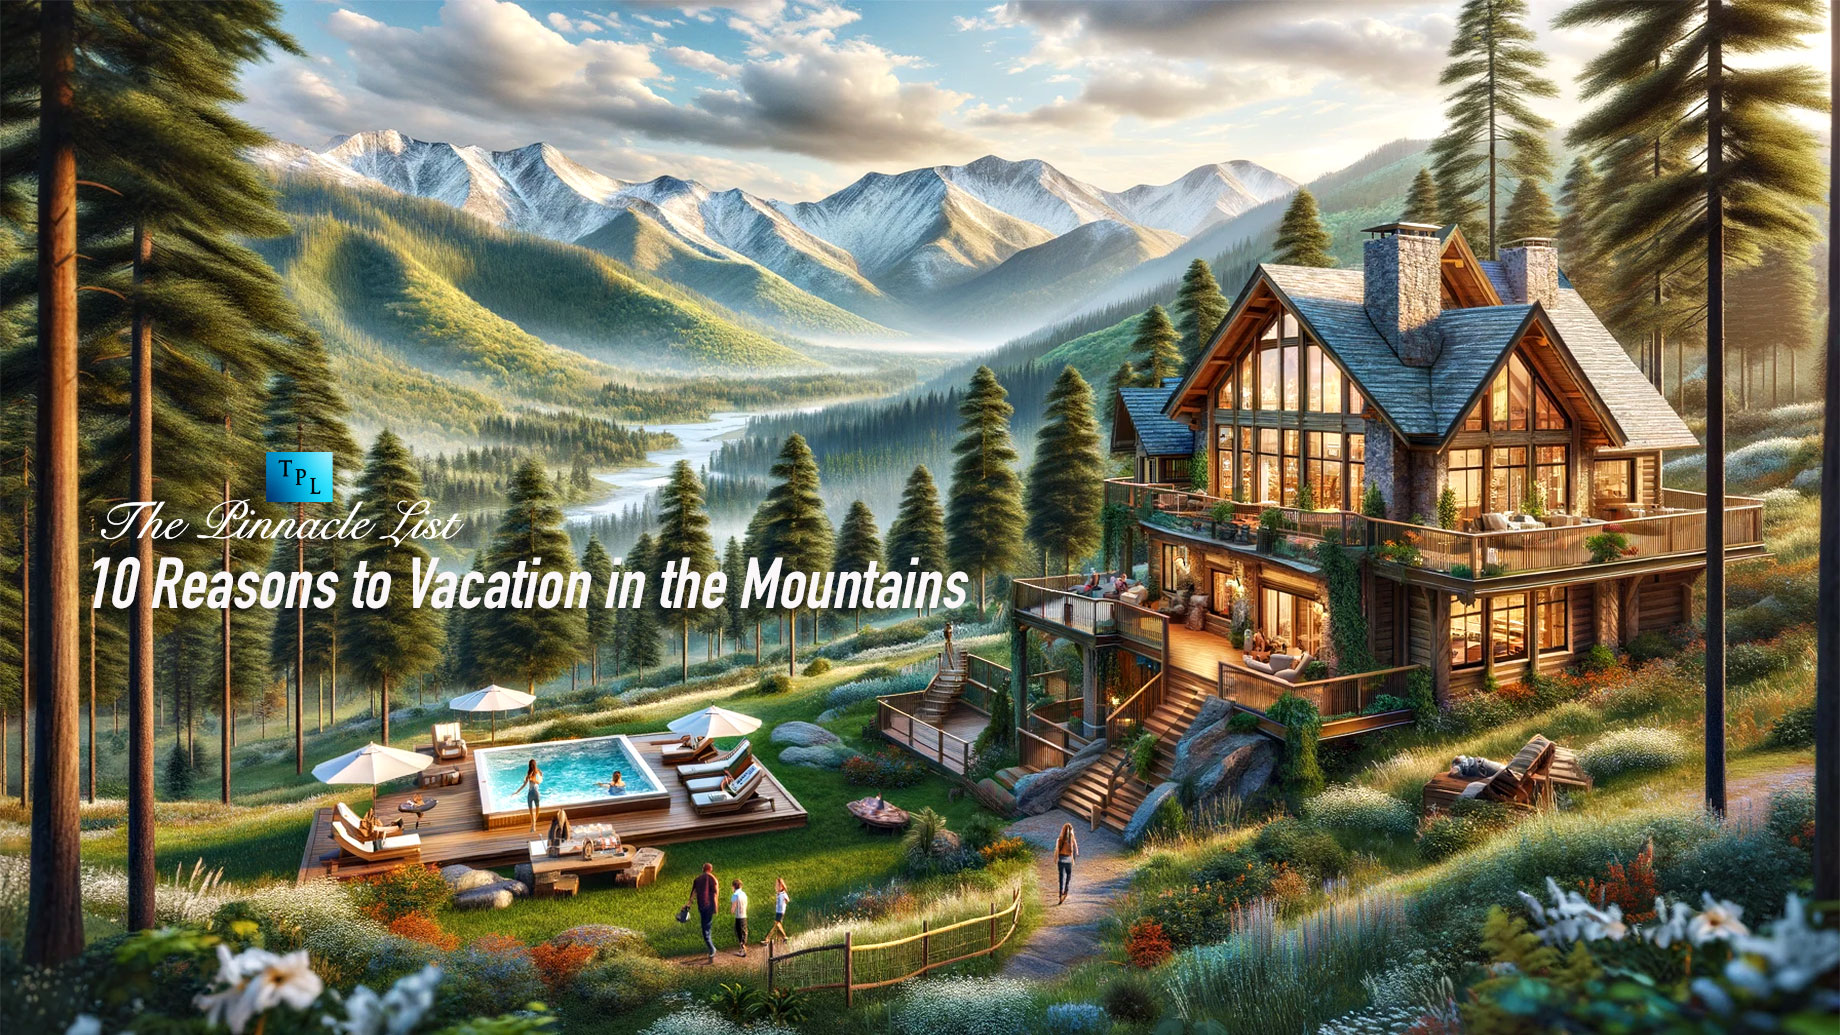 10 Reasons to Vacation in the Mountains